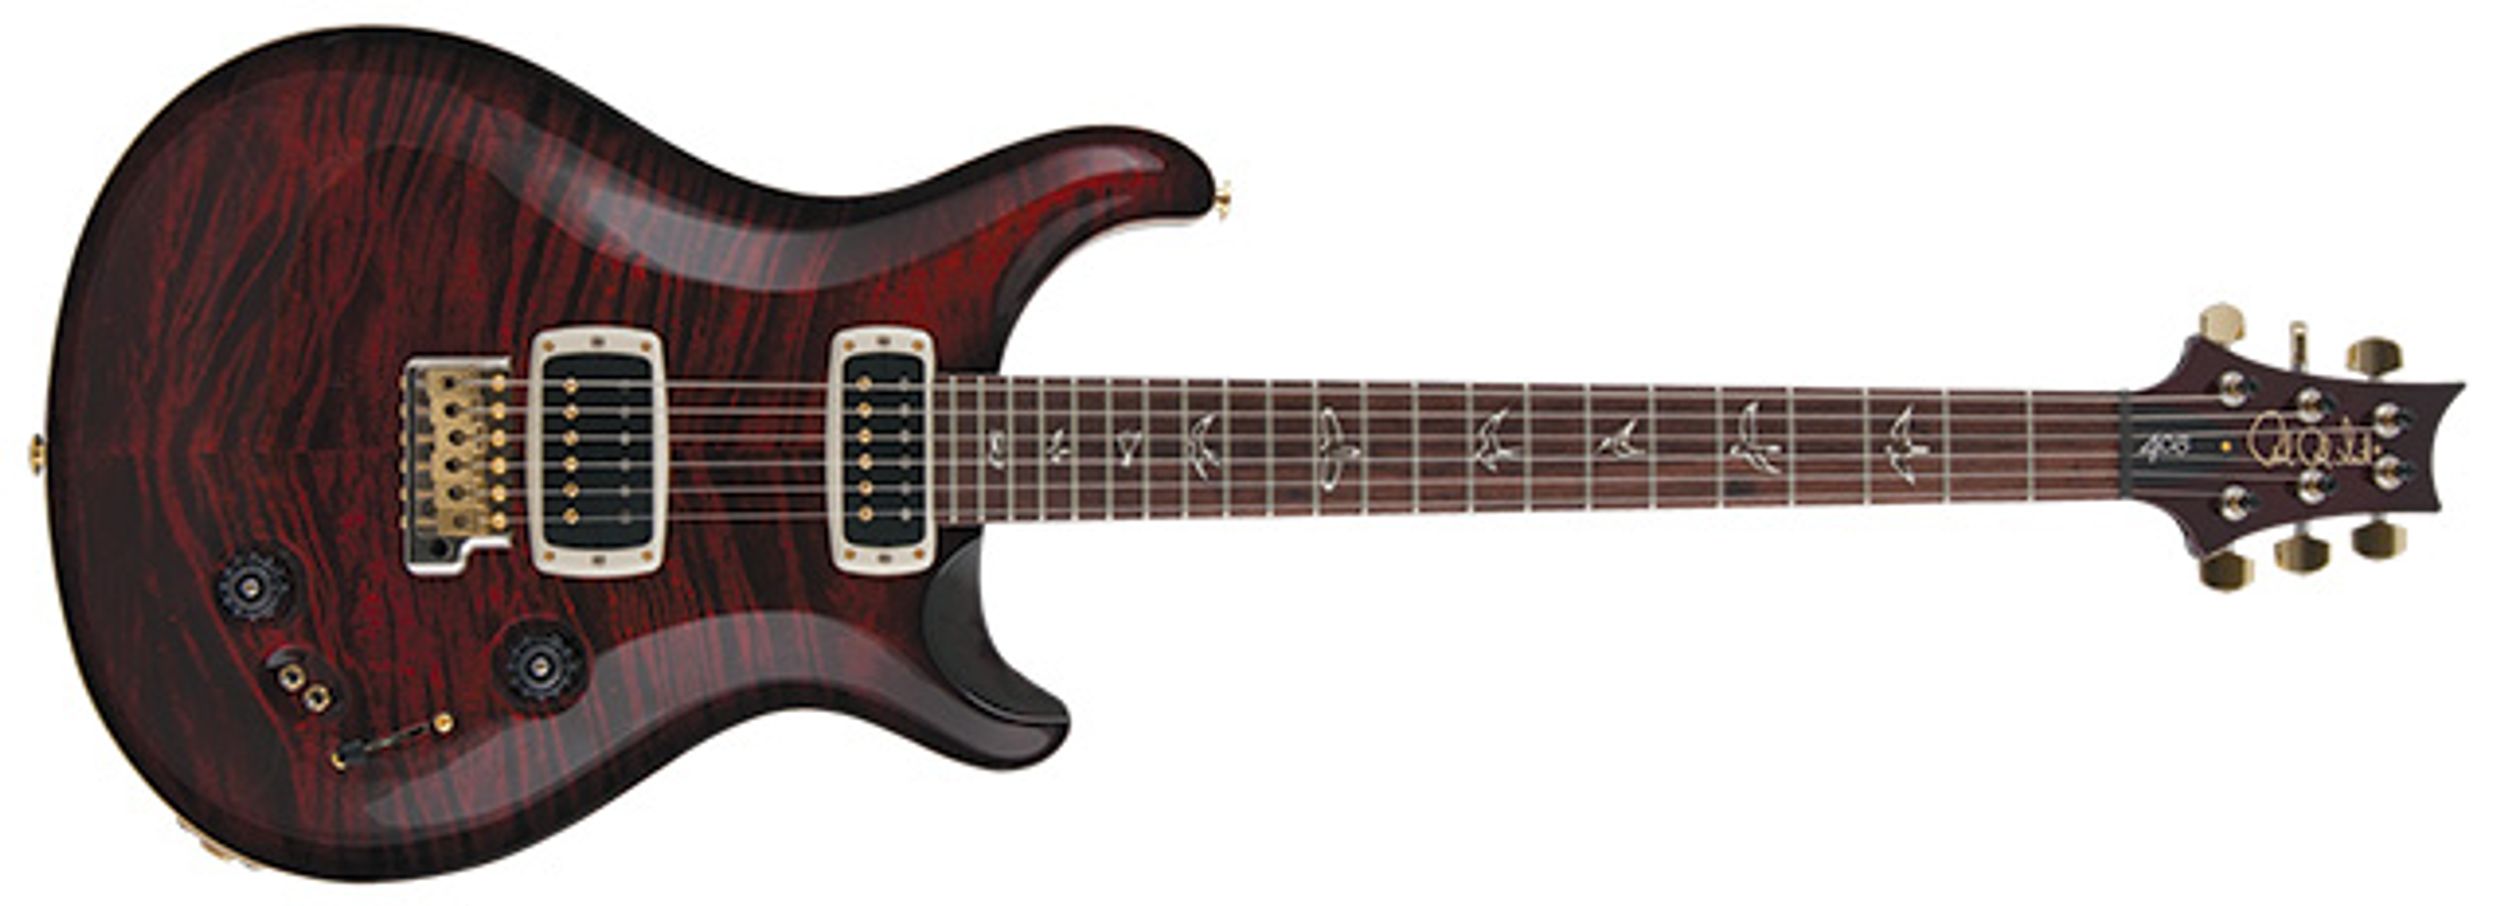 PRS 408 Maple Top Electric Guitar Review